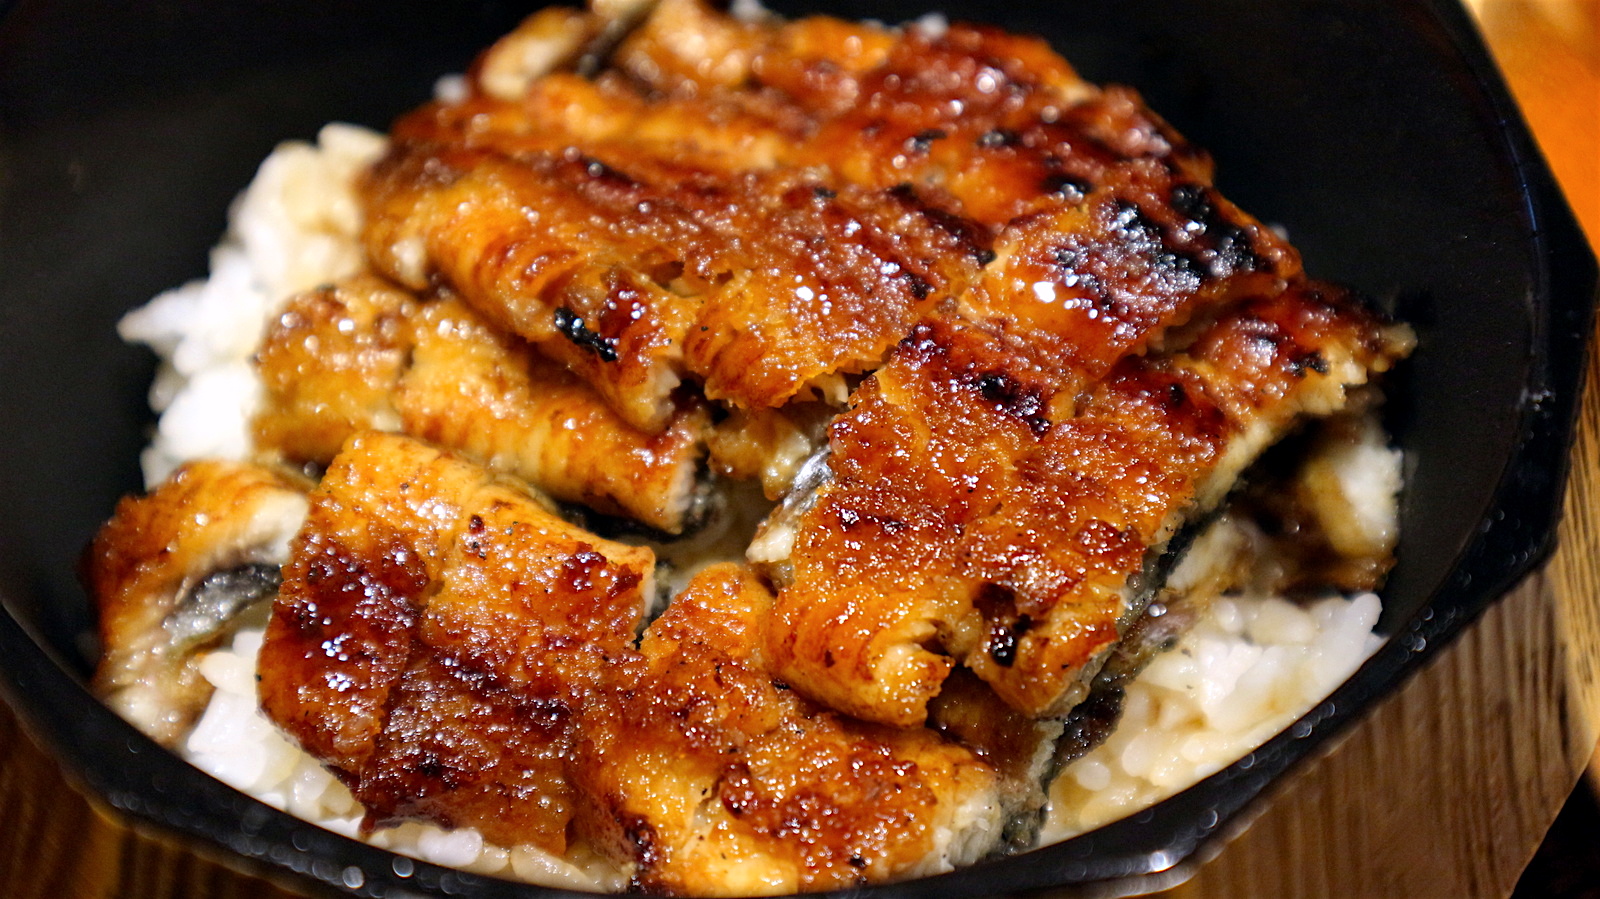 🦞 Say “Yum” Or “Yuck” to These Seafood Dishes and We’ll Reveal How Picky You Are Unagi (Eel) Don